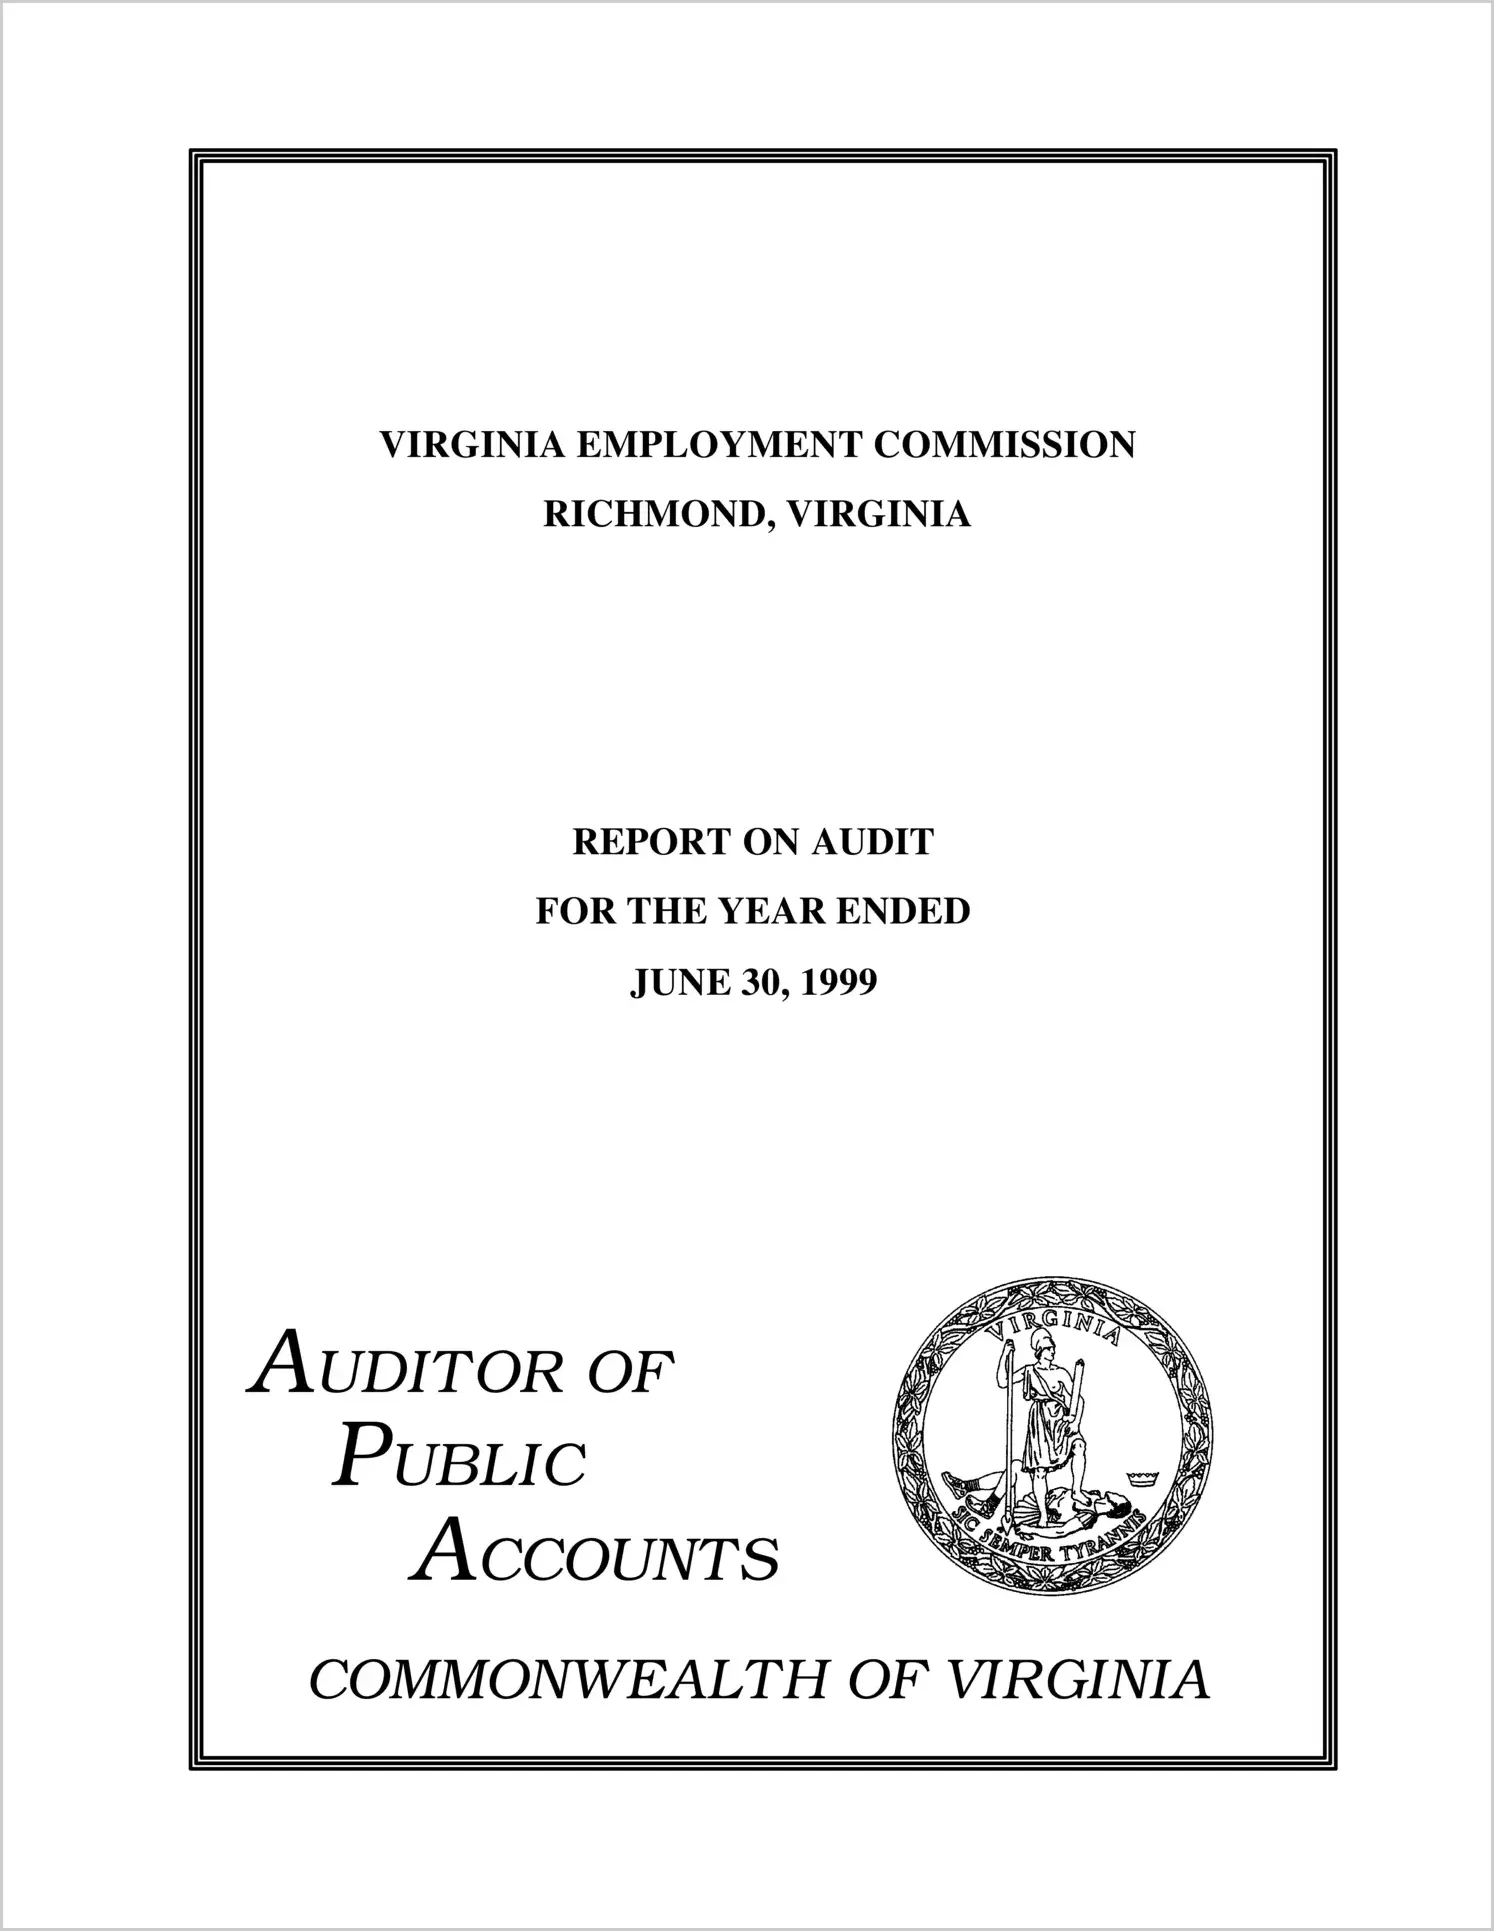 Virginia Employment Commission for the year ended June 30, 1999